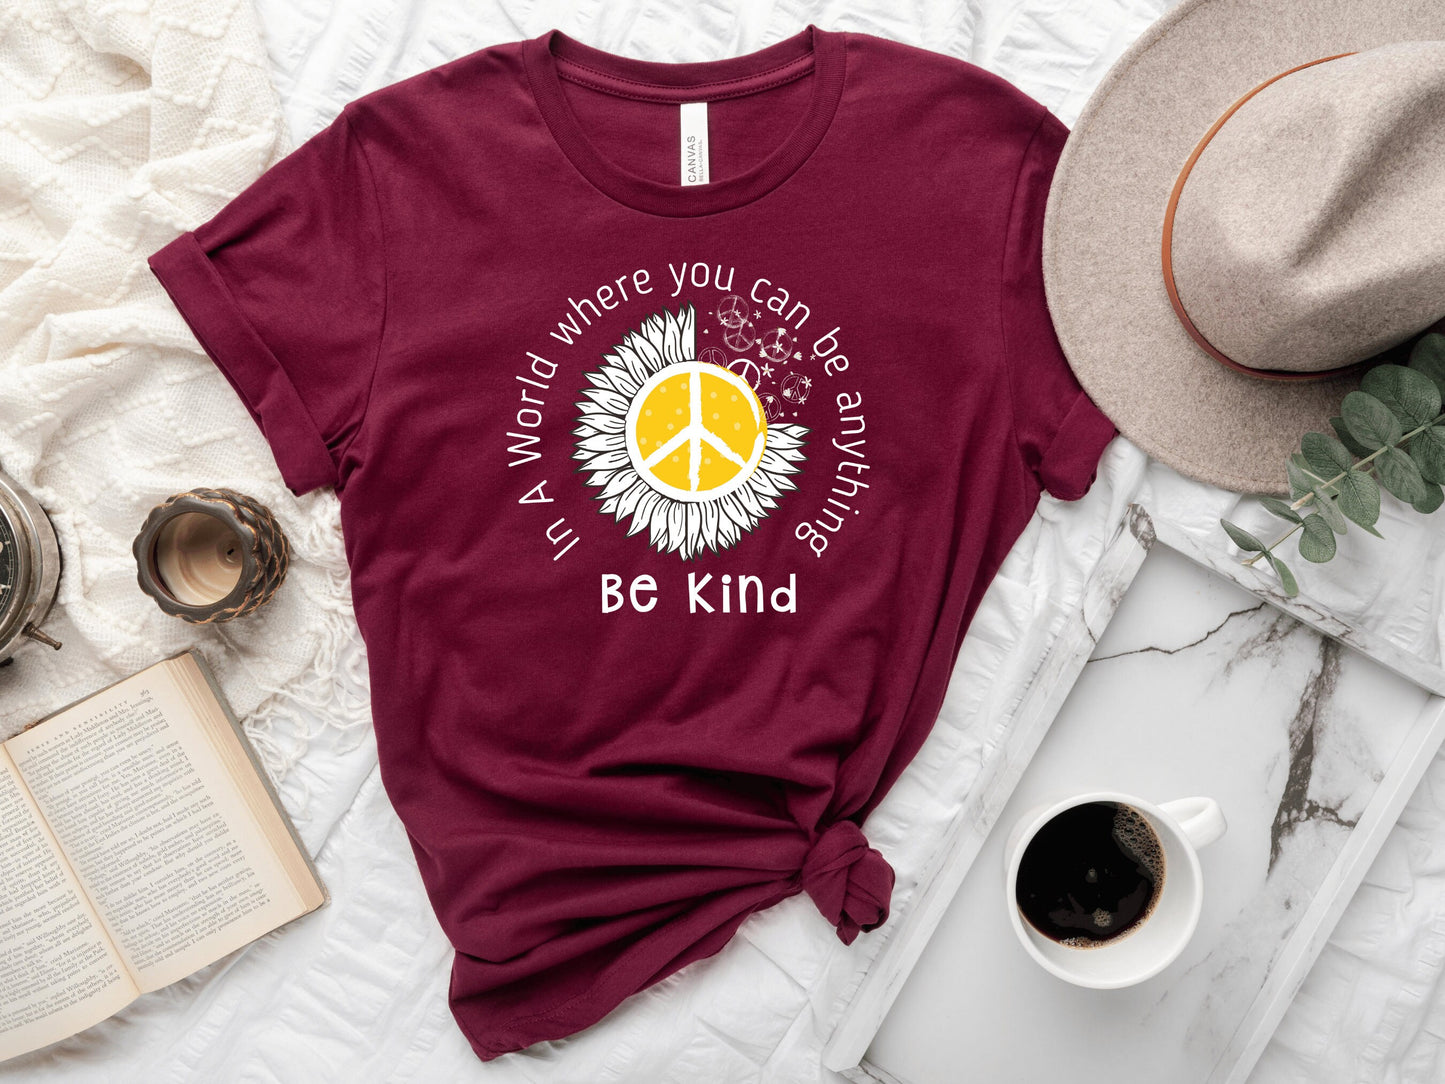 In A World Where You Can Be Anything Be Kind Tee Shirt, Be Kind Shirt, Be Kind TShirt, Kindness Quote, Shirts for Teachers, Choose Kindness